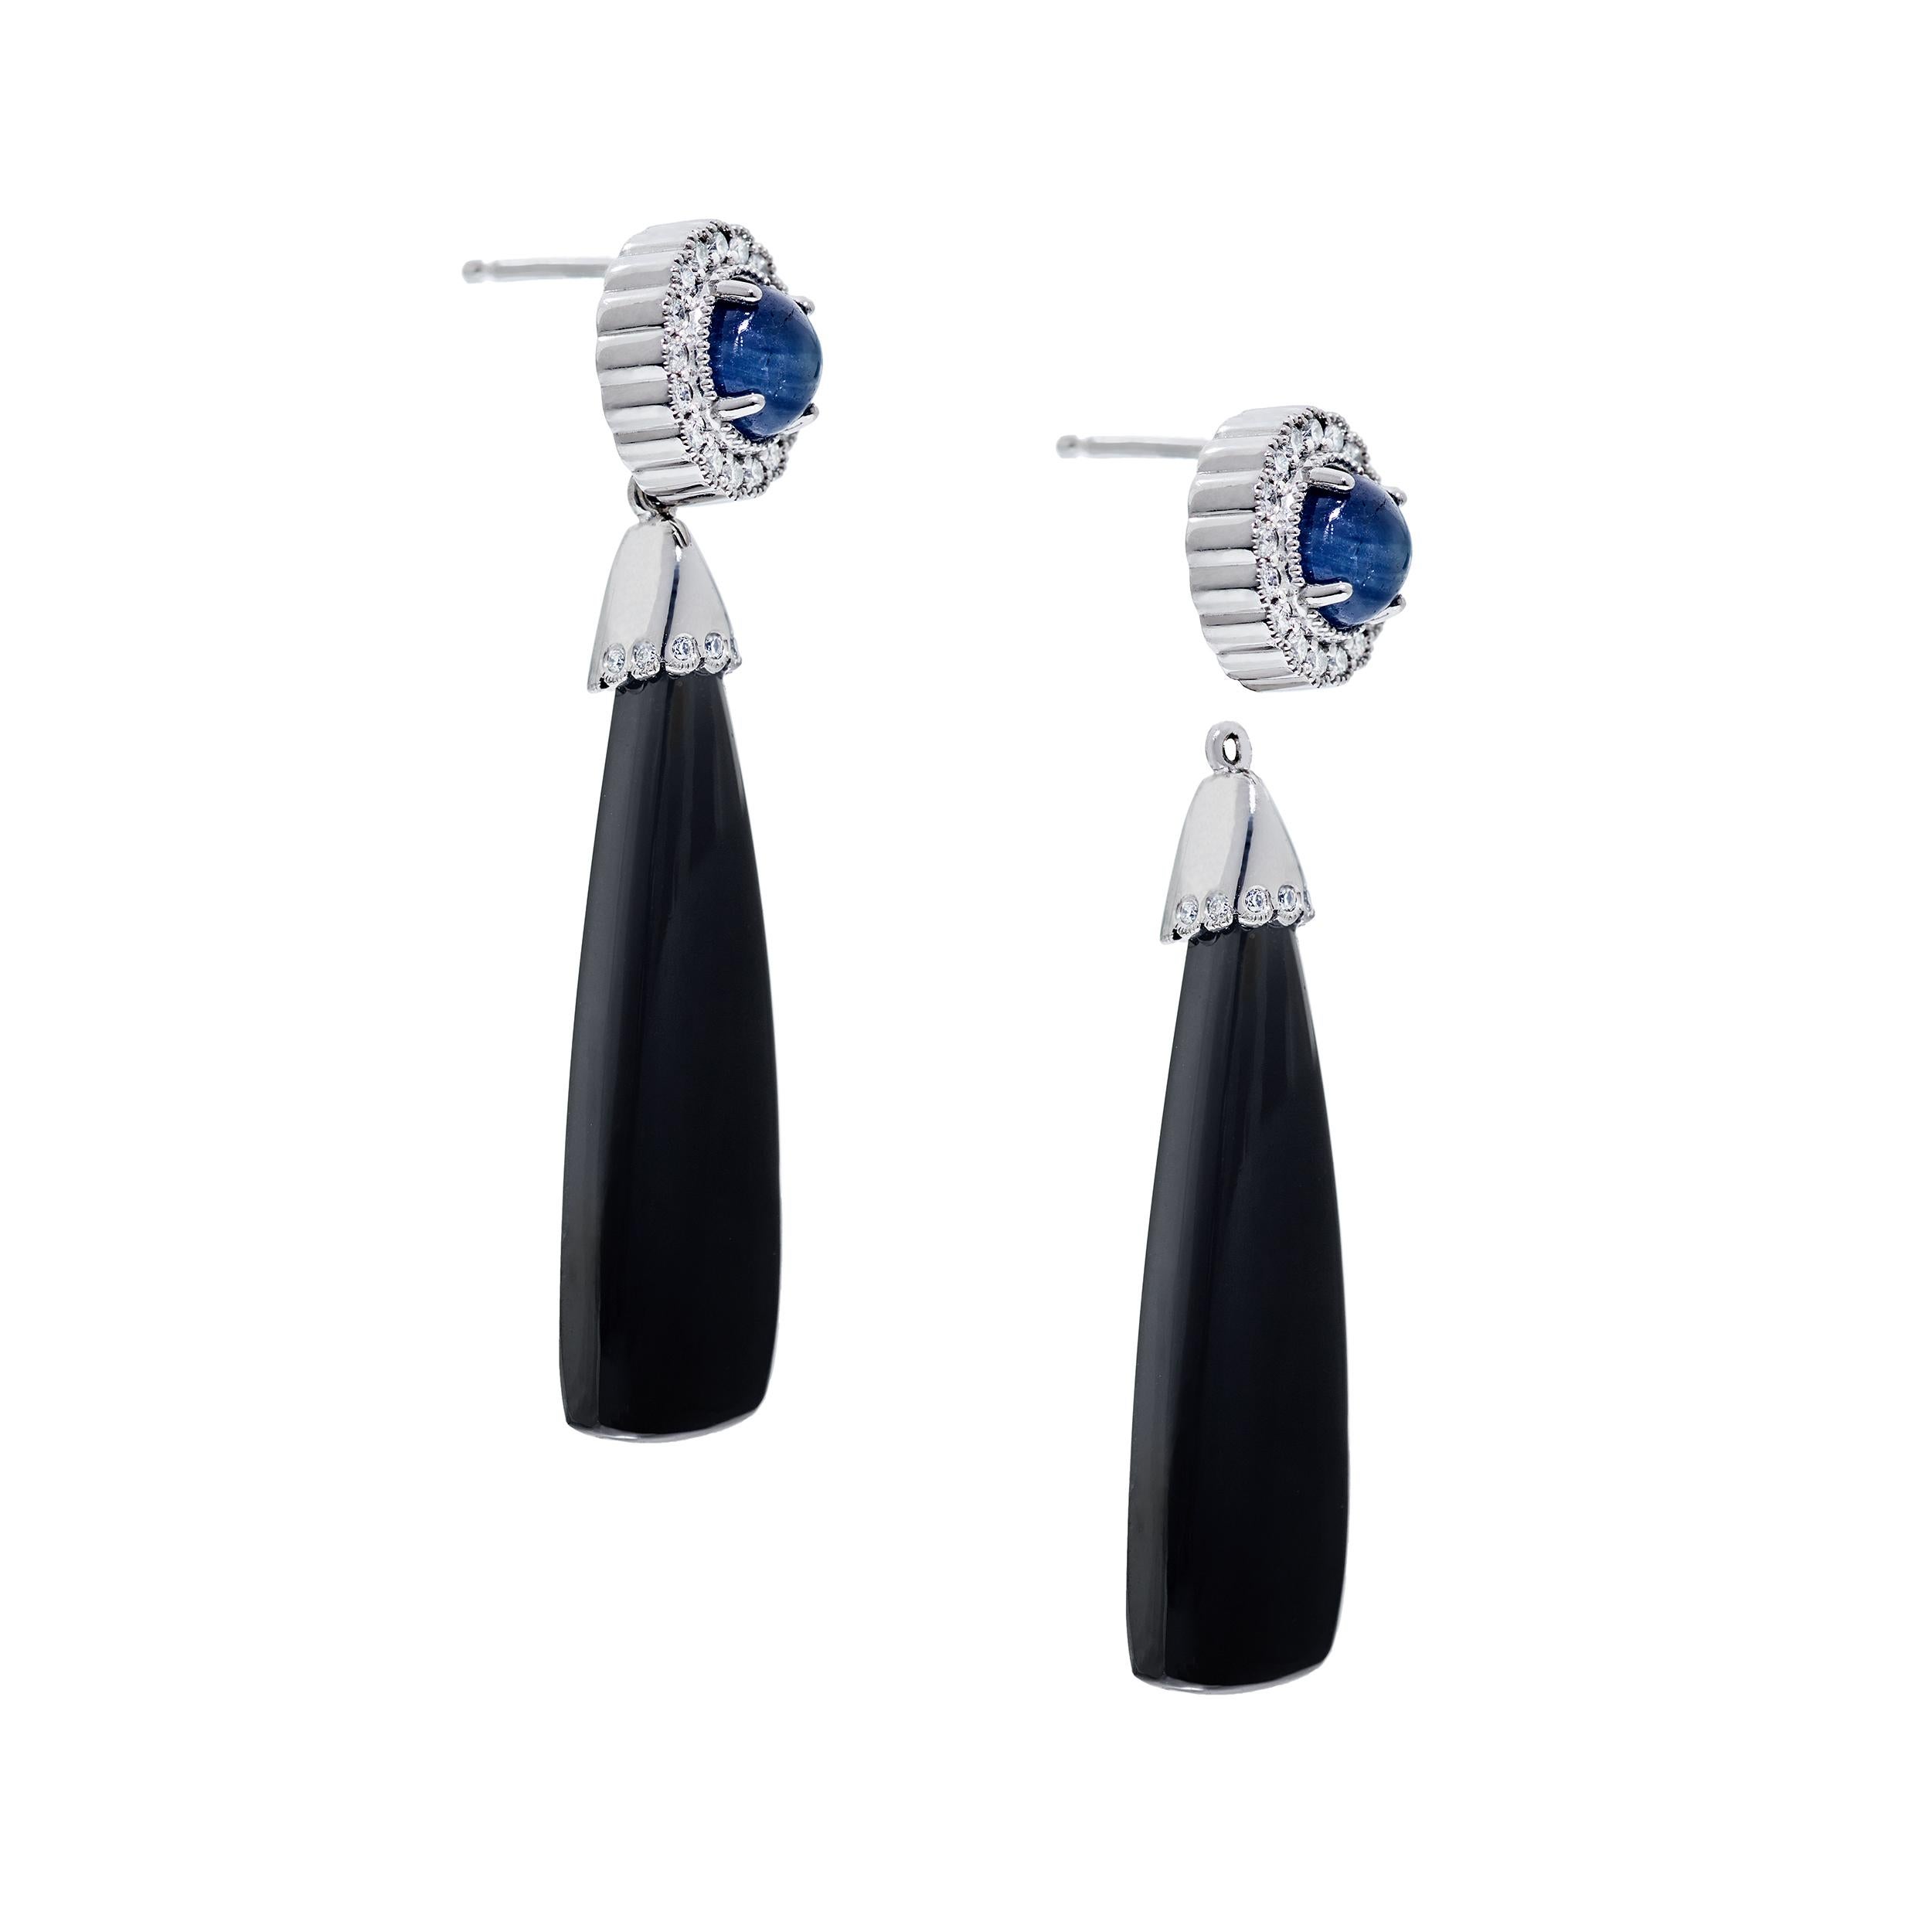 These earrings are detachable, so they can be worn 2 ways!  It's like getting 2 completely different earrings in 1.

Matched Trillion-shaped Onyx Drops Measure:  10 x 35 mm
Sapphire Cabochon Weigh:  2.64 Carats
Diamonds Weight Approximately:  0.50